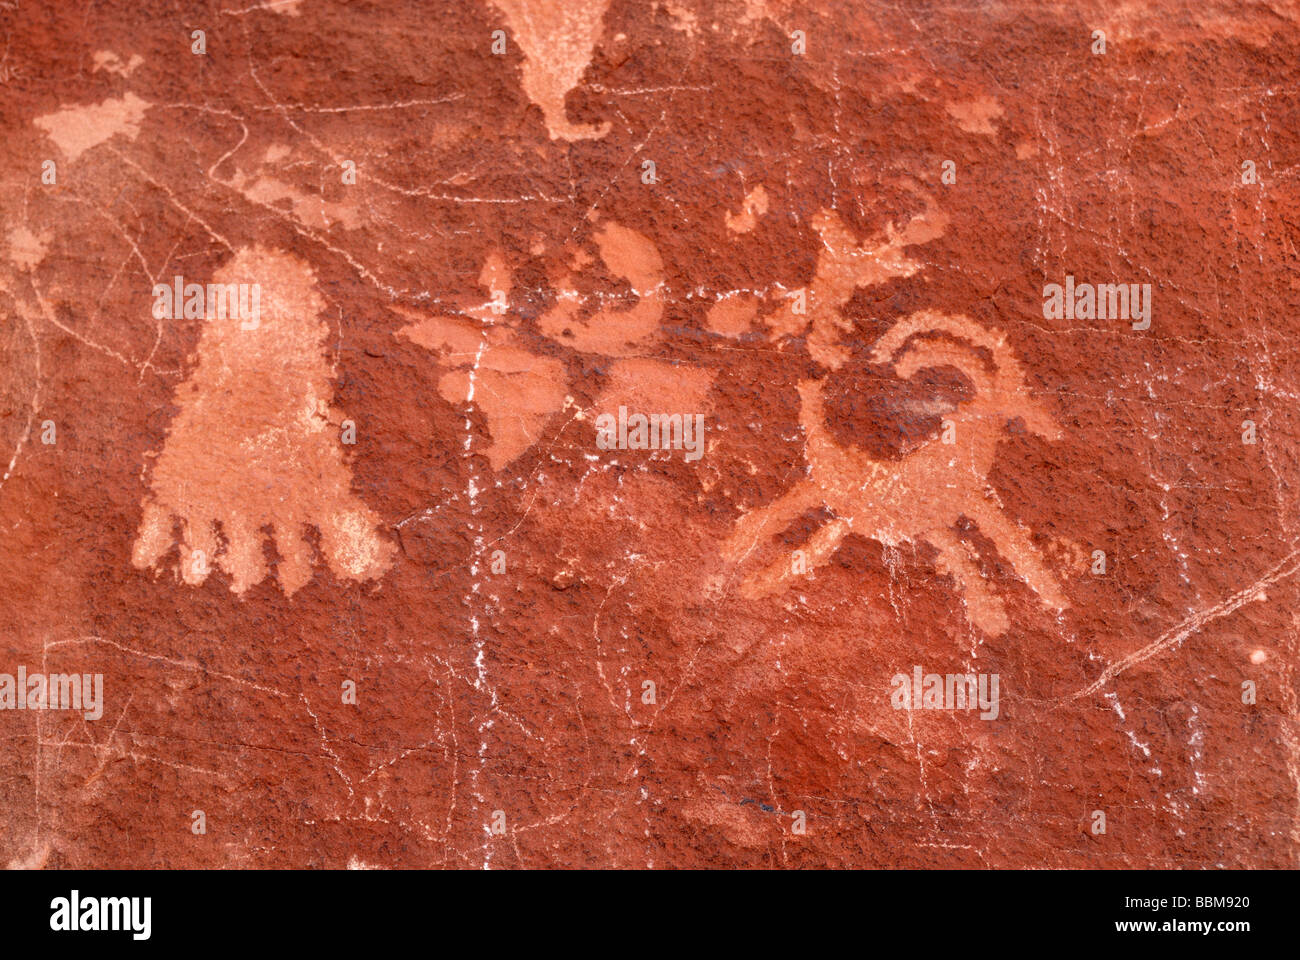 Historic stone etchings, petroglyphes, about 4000 years old, Atlatl Rock, Valley of Fire State Park, Nevada, USA Stock Photo